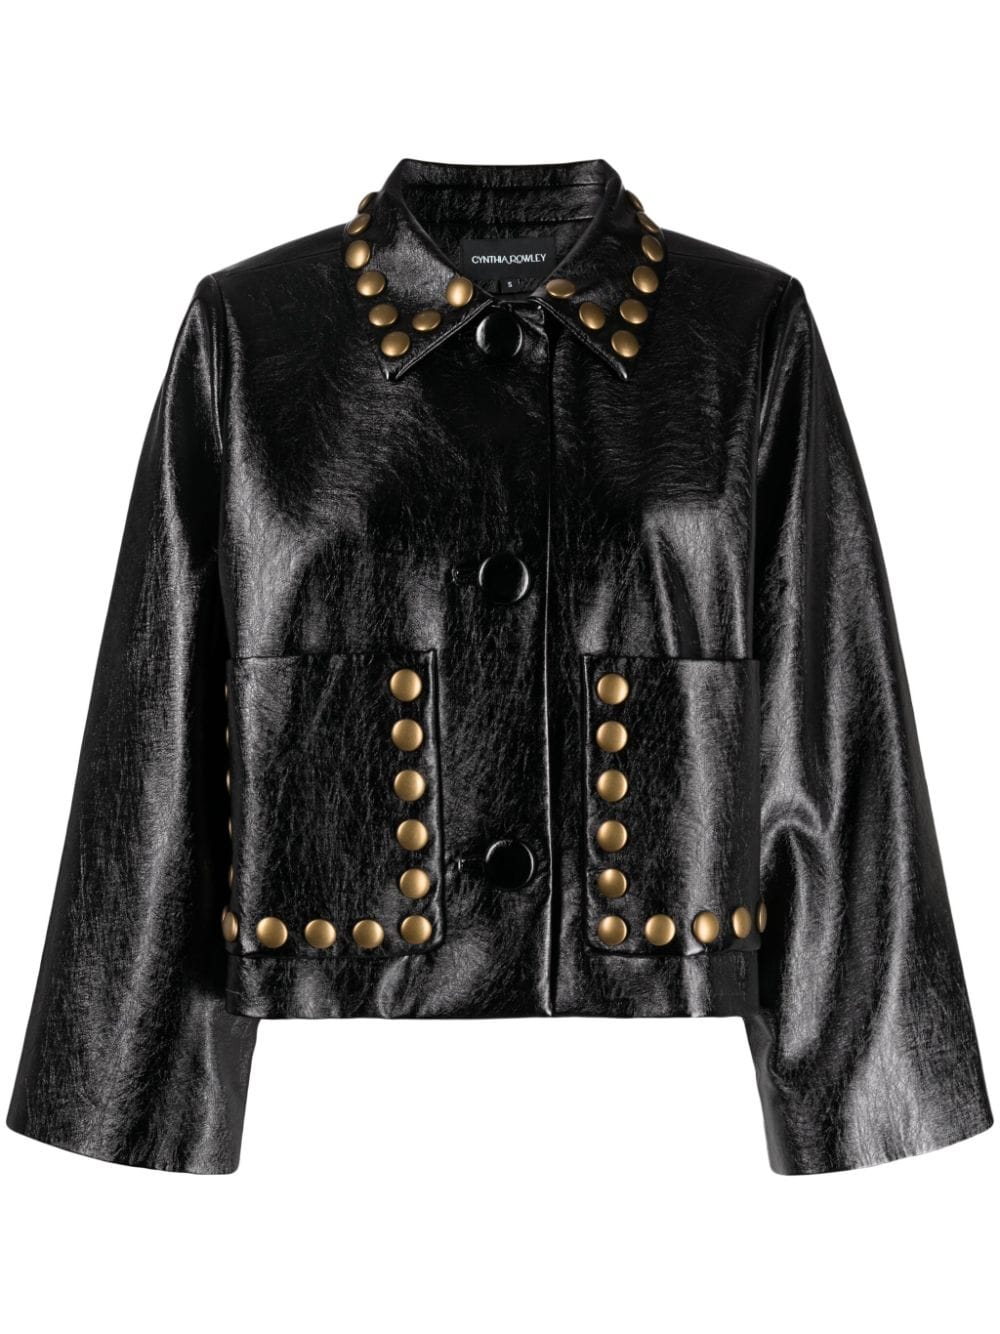 Cynthia Rowley Women's Studded Faux Leather Jacket In Black